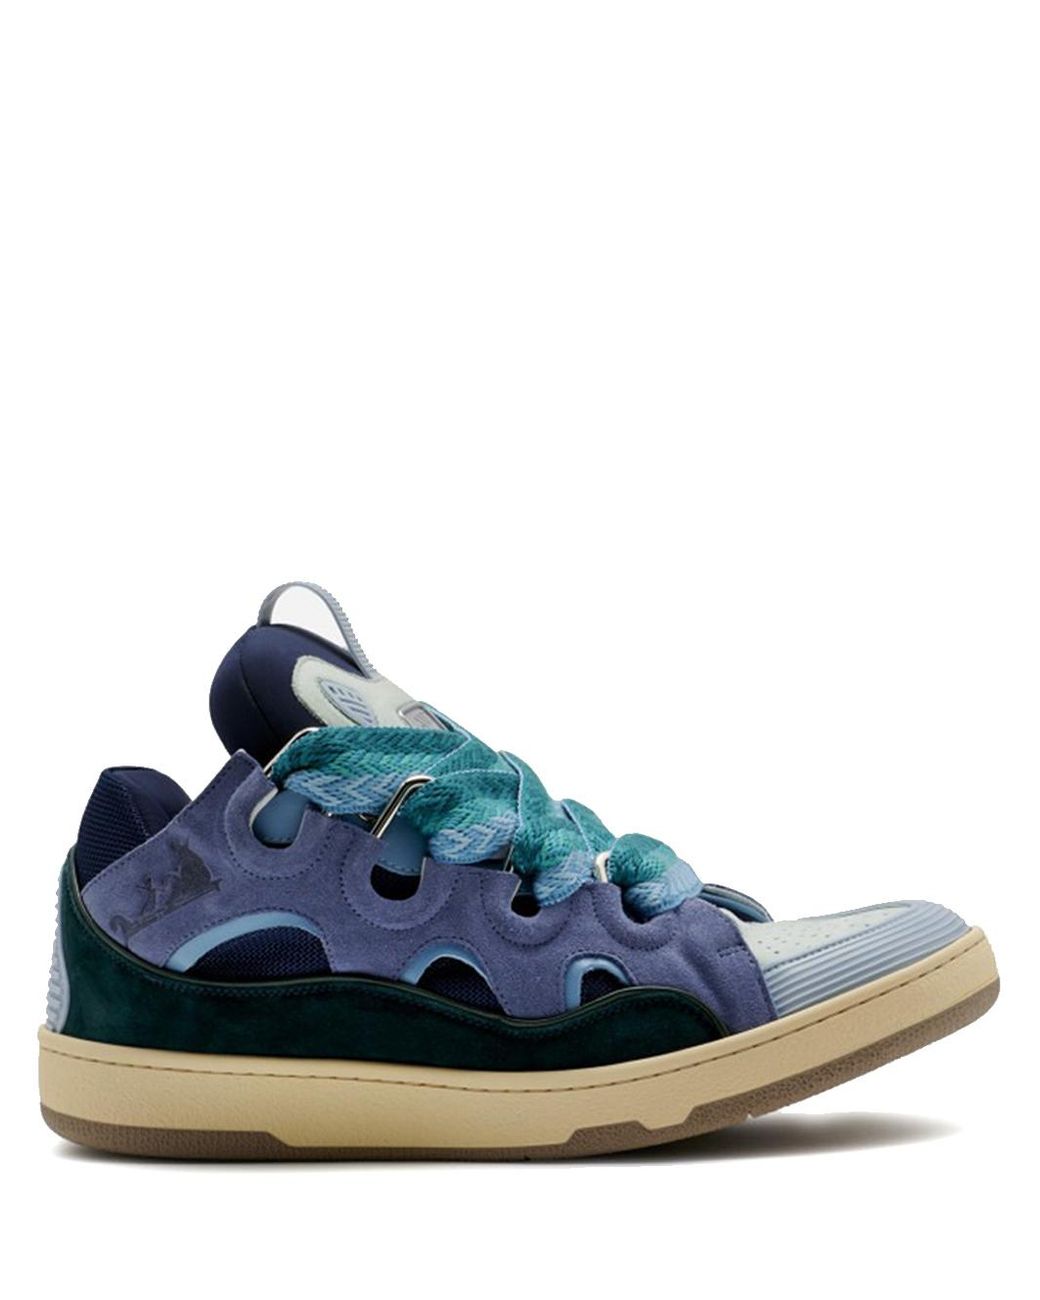 Lanvin Crub Sneakers Blue And Green In Leather for Men | Lyst